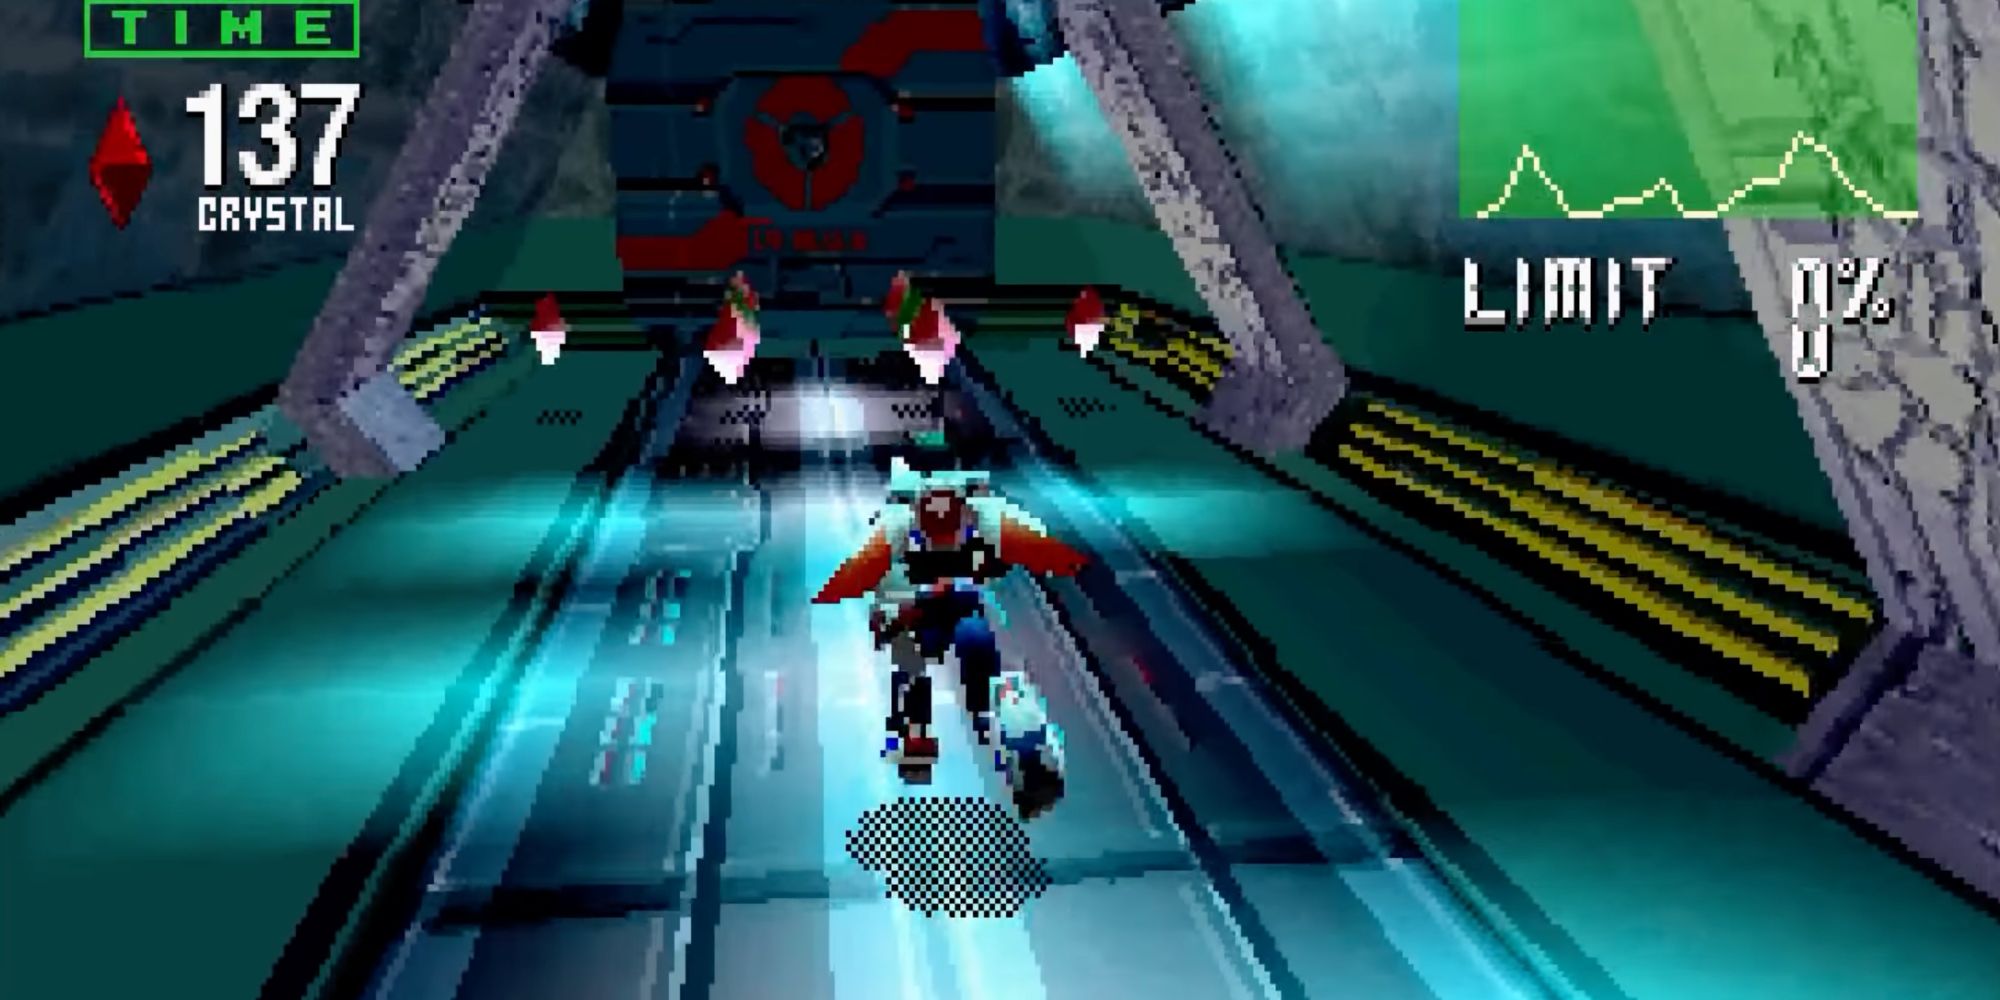 A screenshot from Burning Rangers, showing the hero running through a dimly-lit hallway